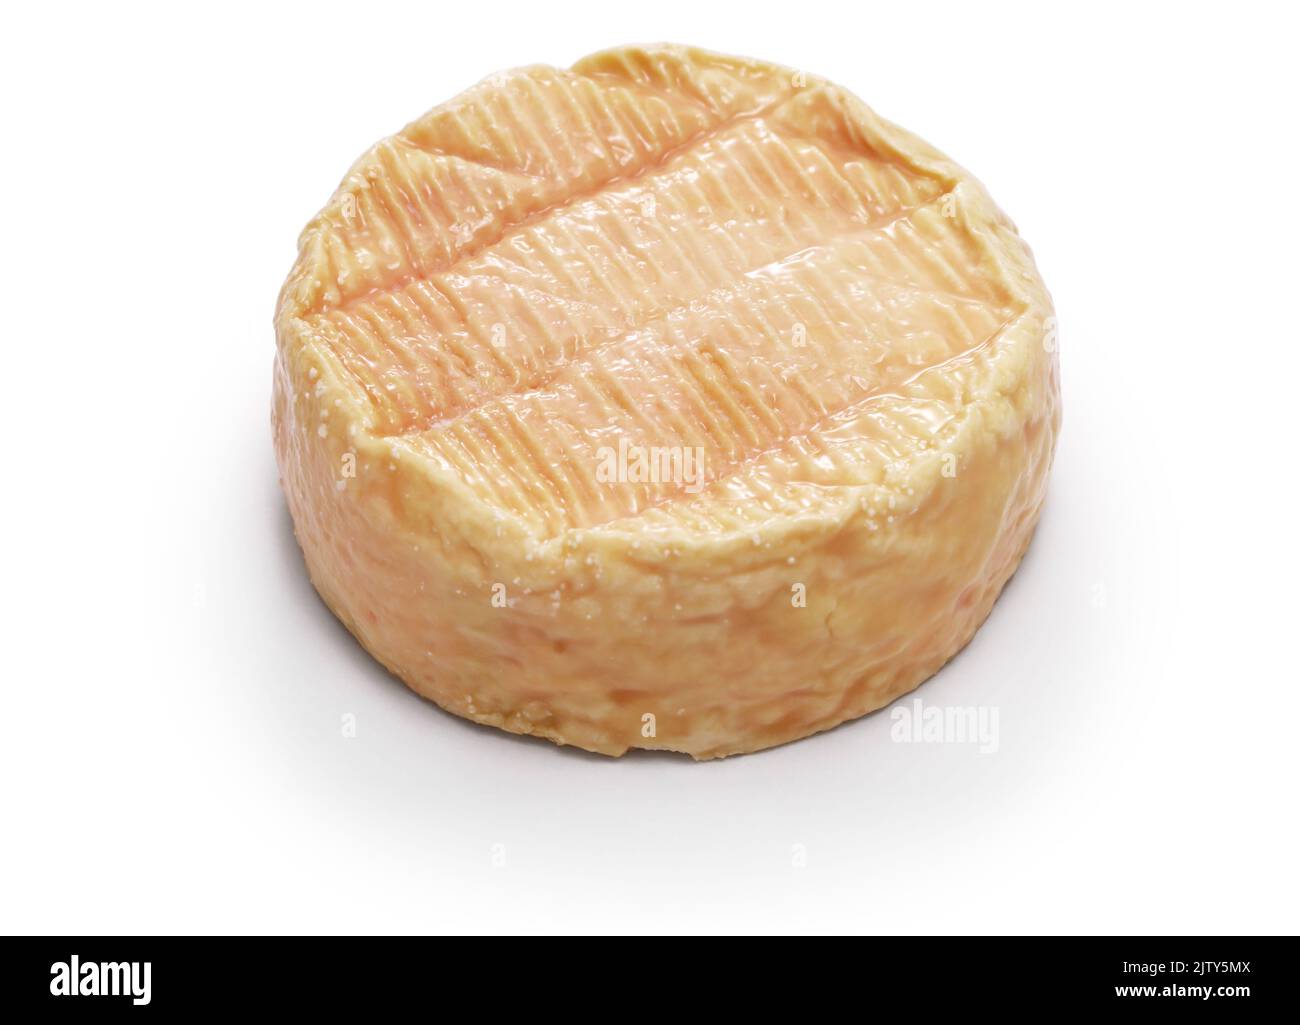 Munster (washed rind cheese from Alsace, France ) isolated on white background Stock Photo